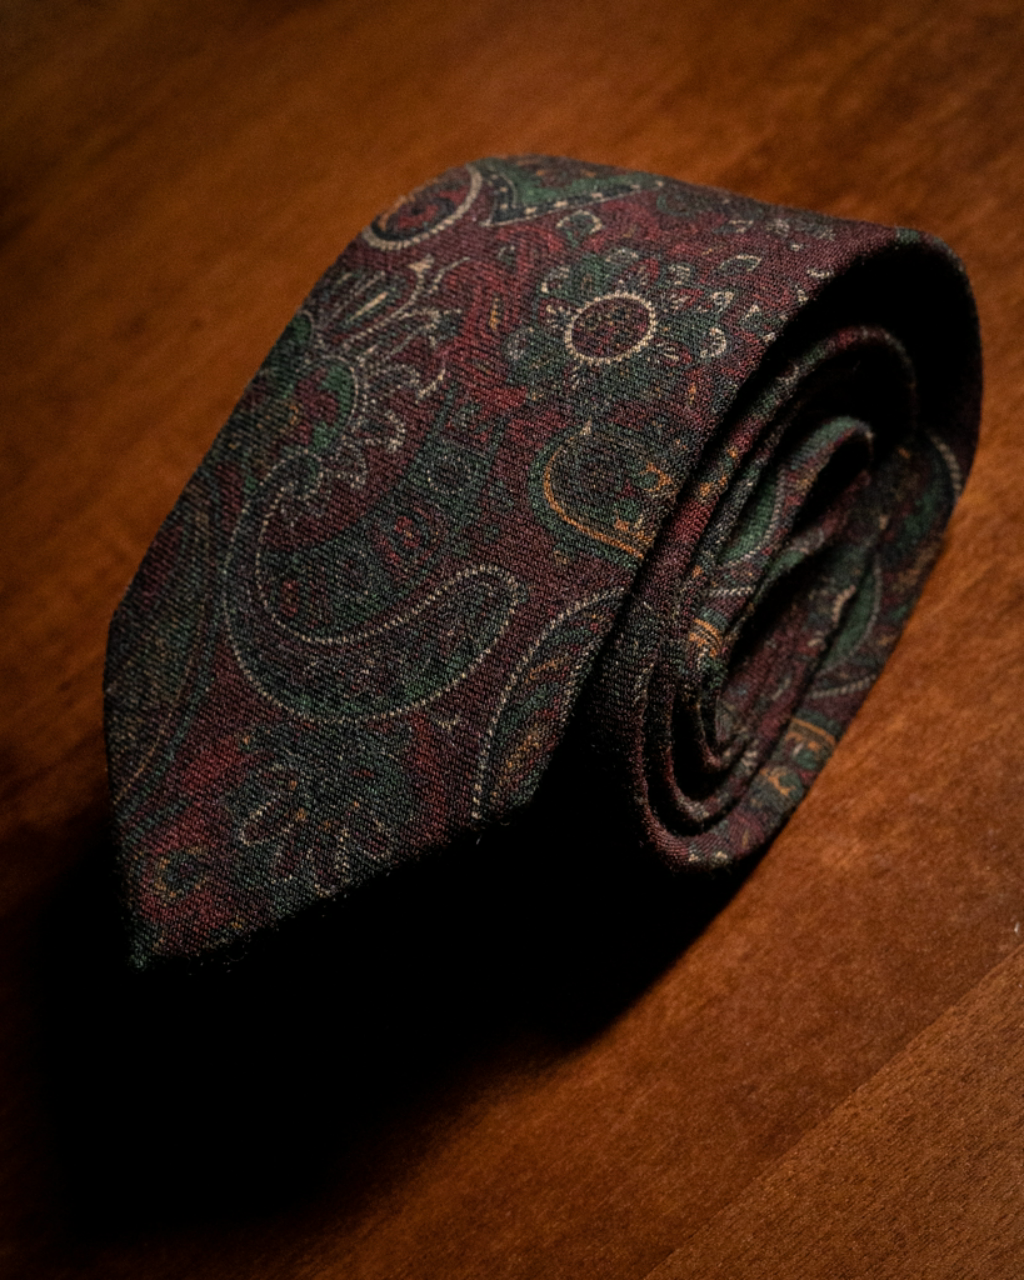 Agostino Burgundy Tie with Floral Pattern 